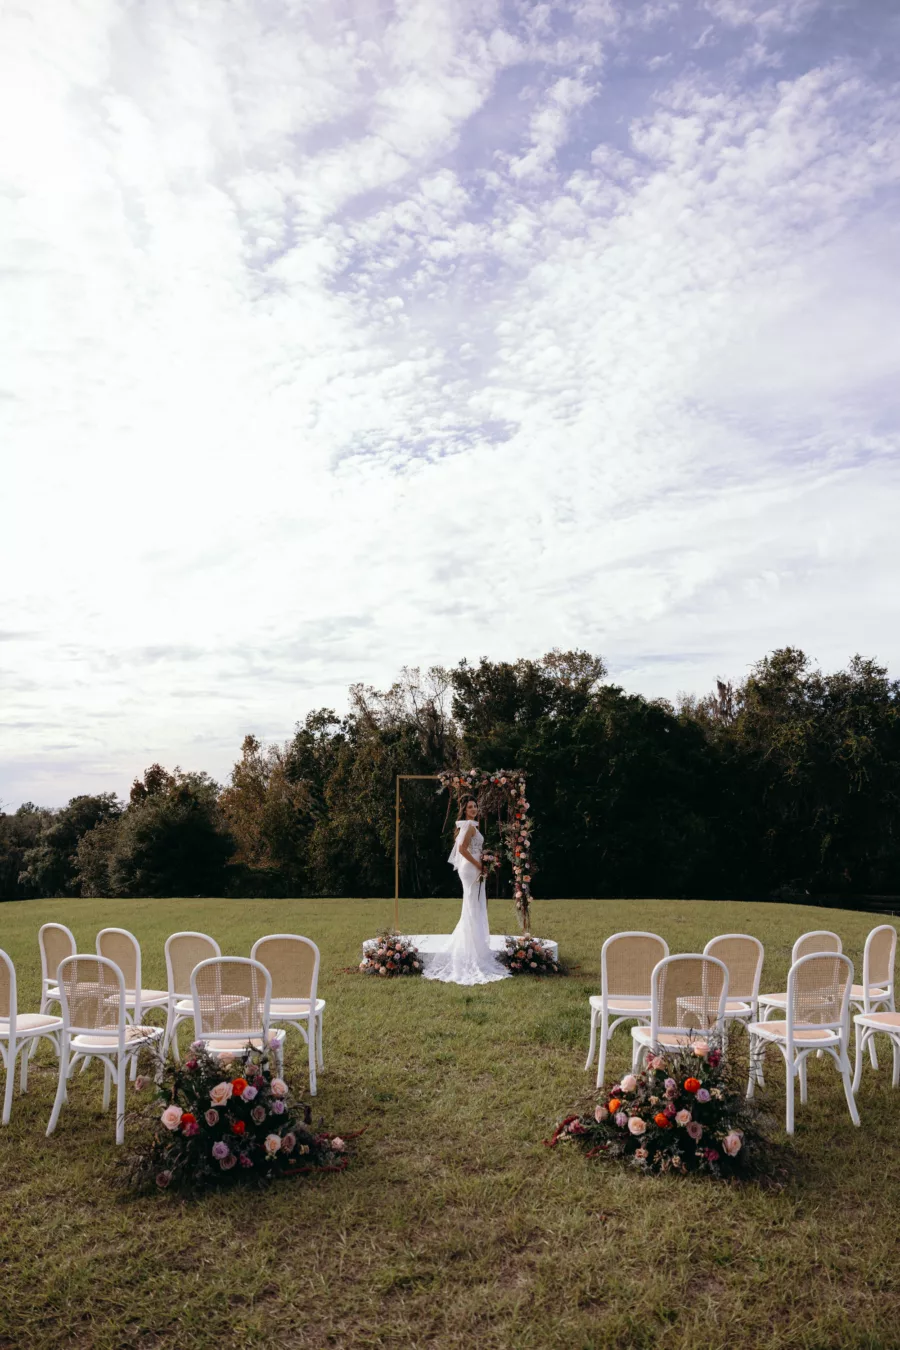 Moody Purple and Peach Wedding Ceremony with White Stage | Whimsical Purple and Peach Roses, Chrysanthemums, Amaranthus, and Greenery Wedding Ceremony Gold Arbor Decor Inspiration | Tampa Bay Event Venue La Hacienda At Snow Hill | Planner MDP Events | Florist Save The Date Florida | Photographer Arianna J Photography